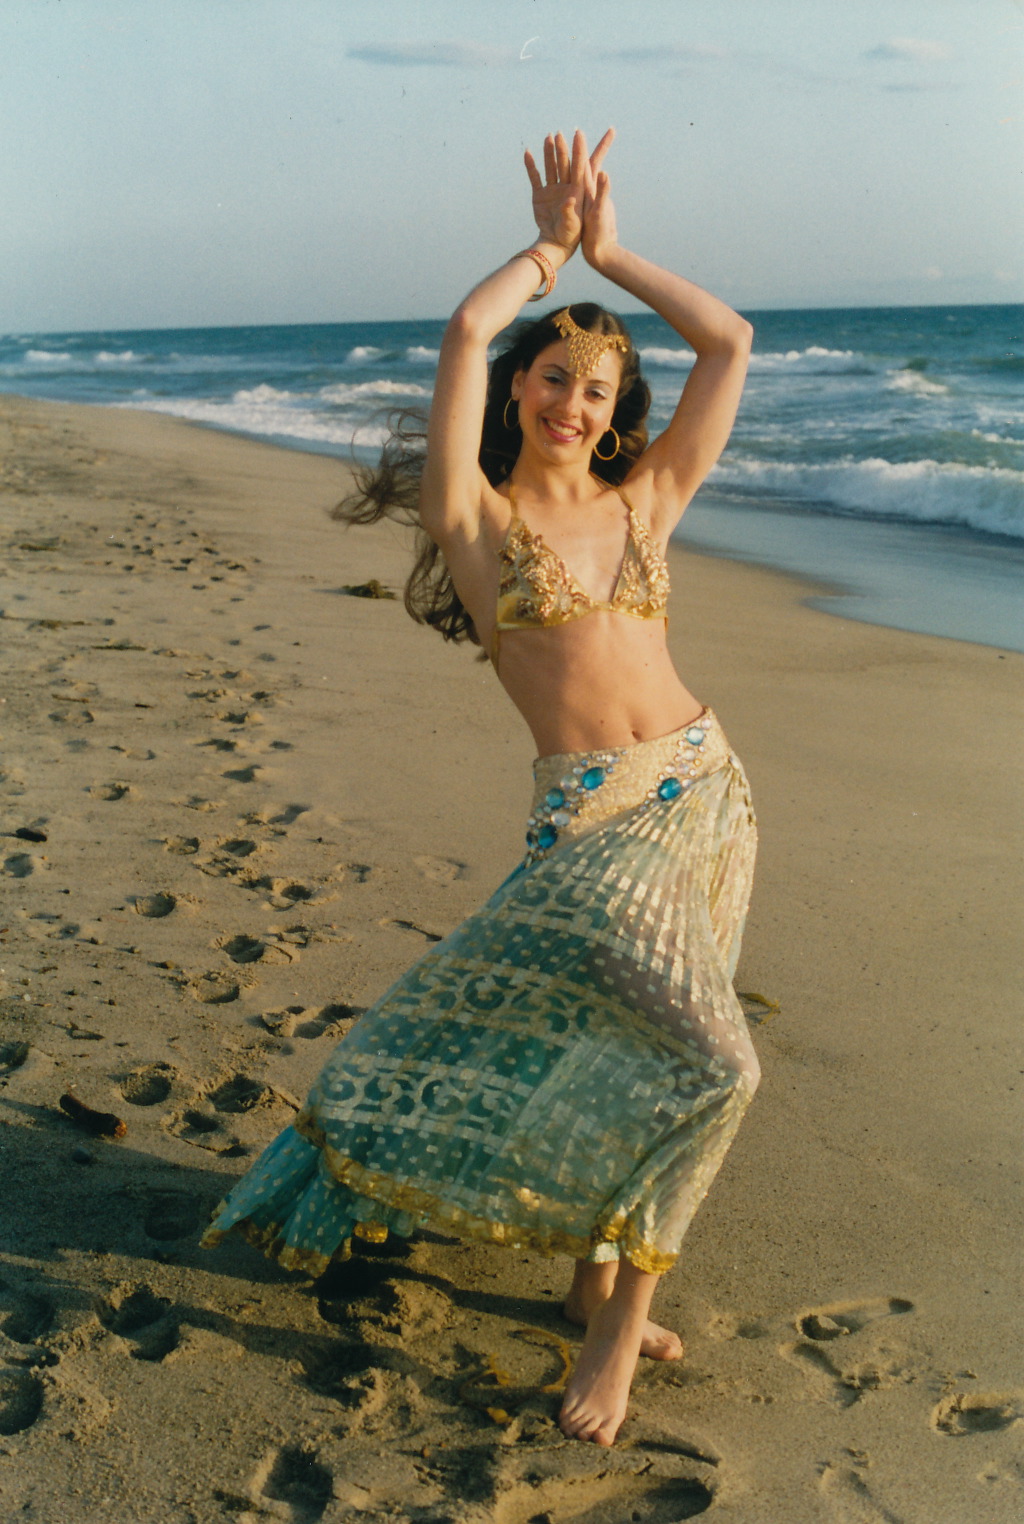 Costuming myself for a photo shoot in January 1993 at Zuma Beach. The wardrobe is courtesy of E.C. II Costumes.